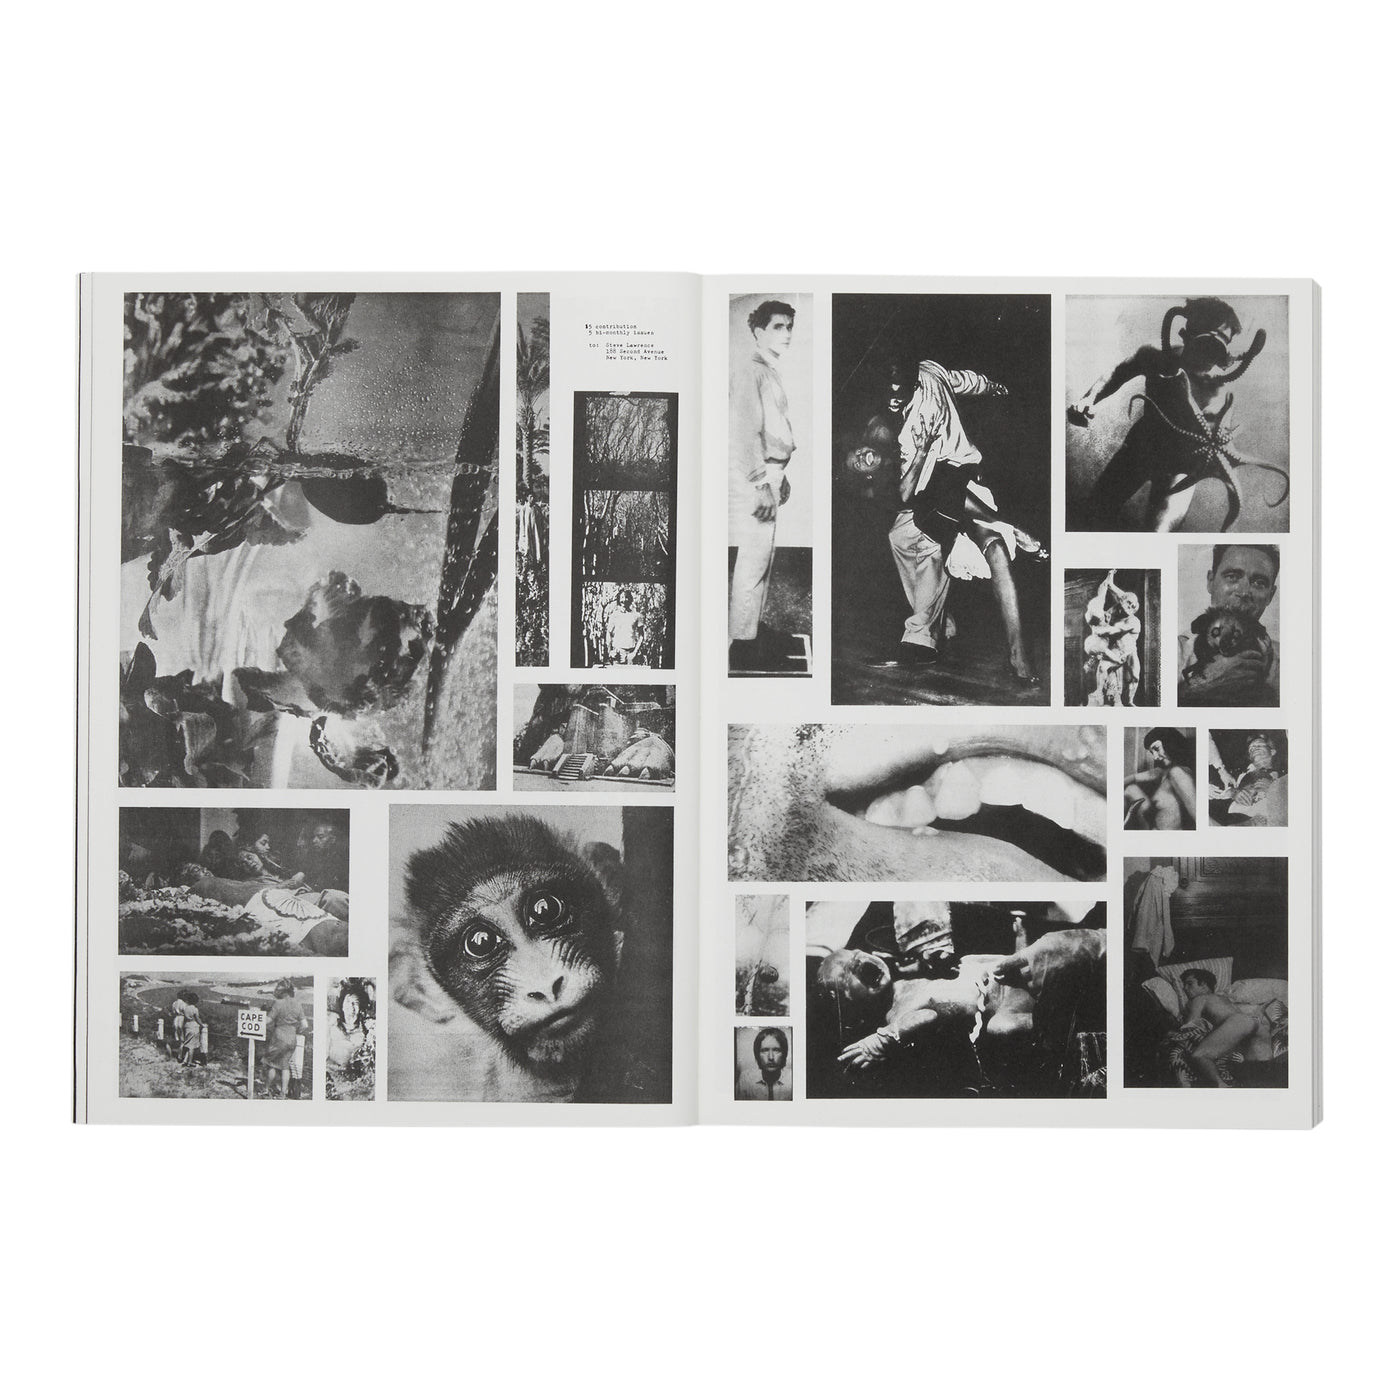 Newspaper - Various Artists edited by Peter Hujar and Andrew Ullrick}